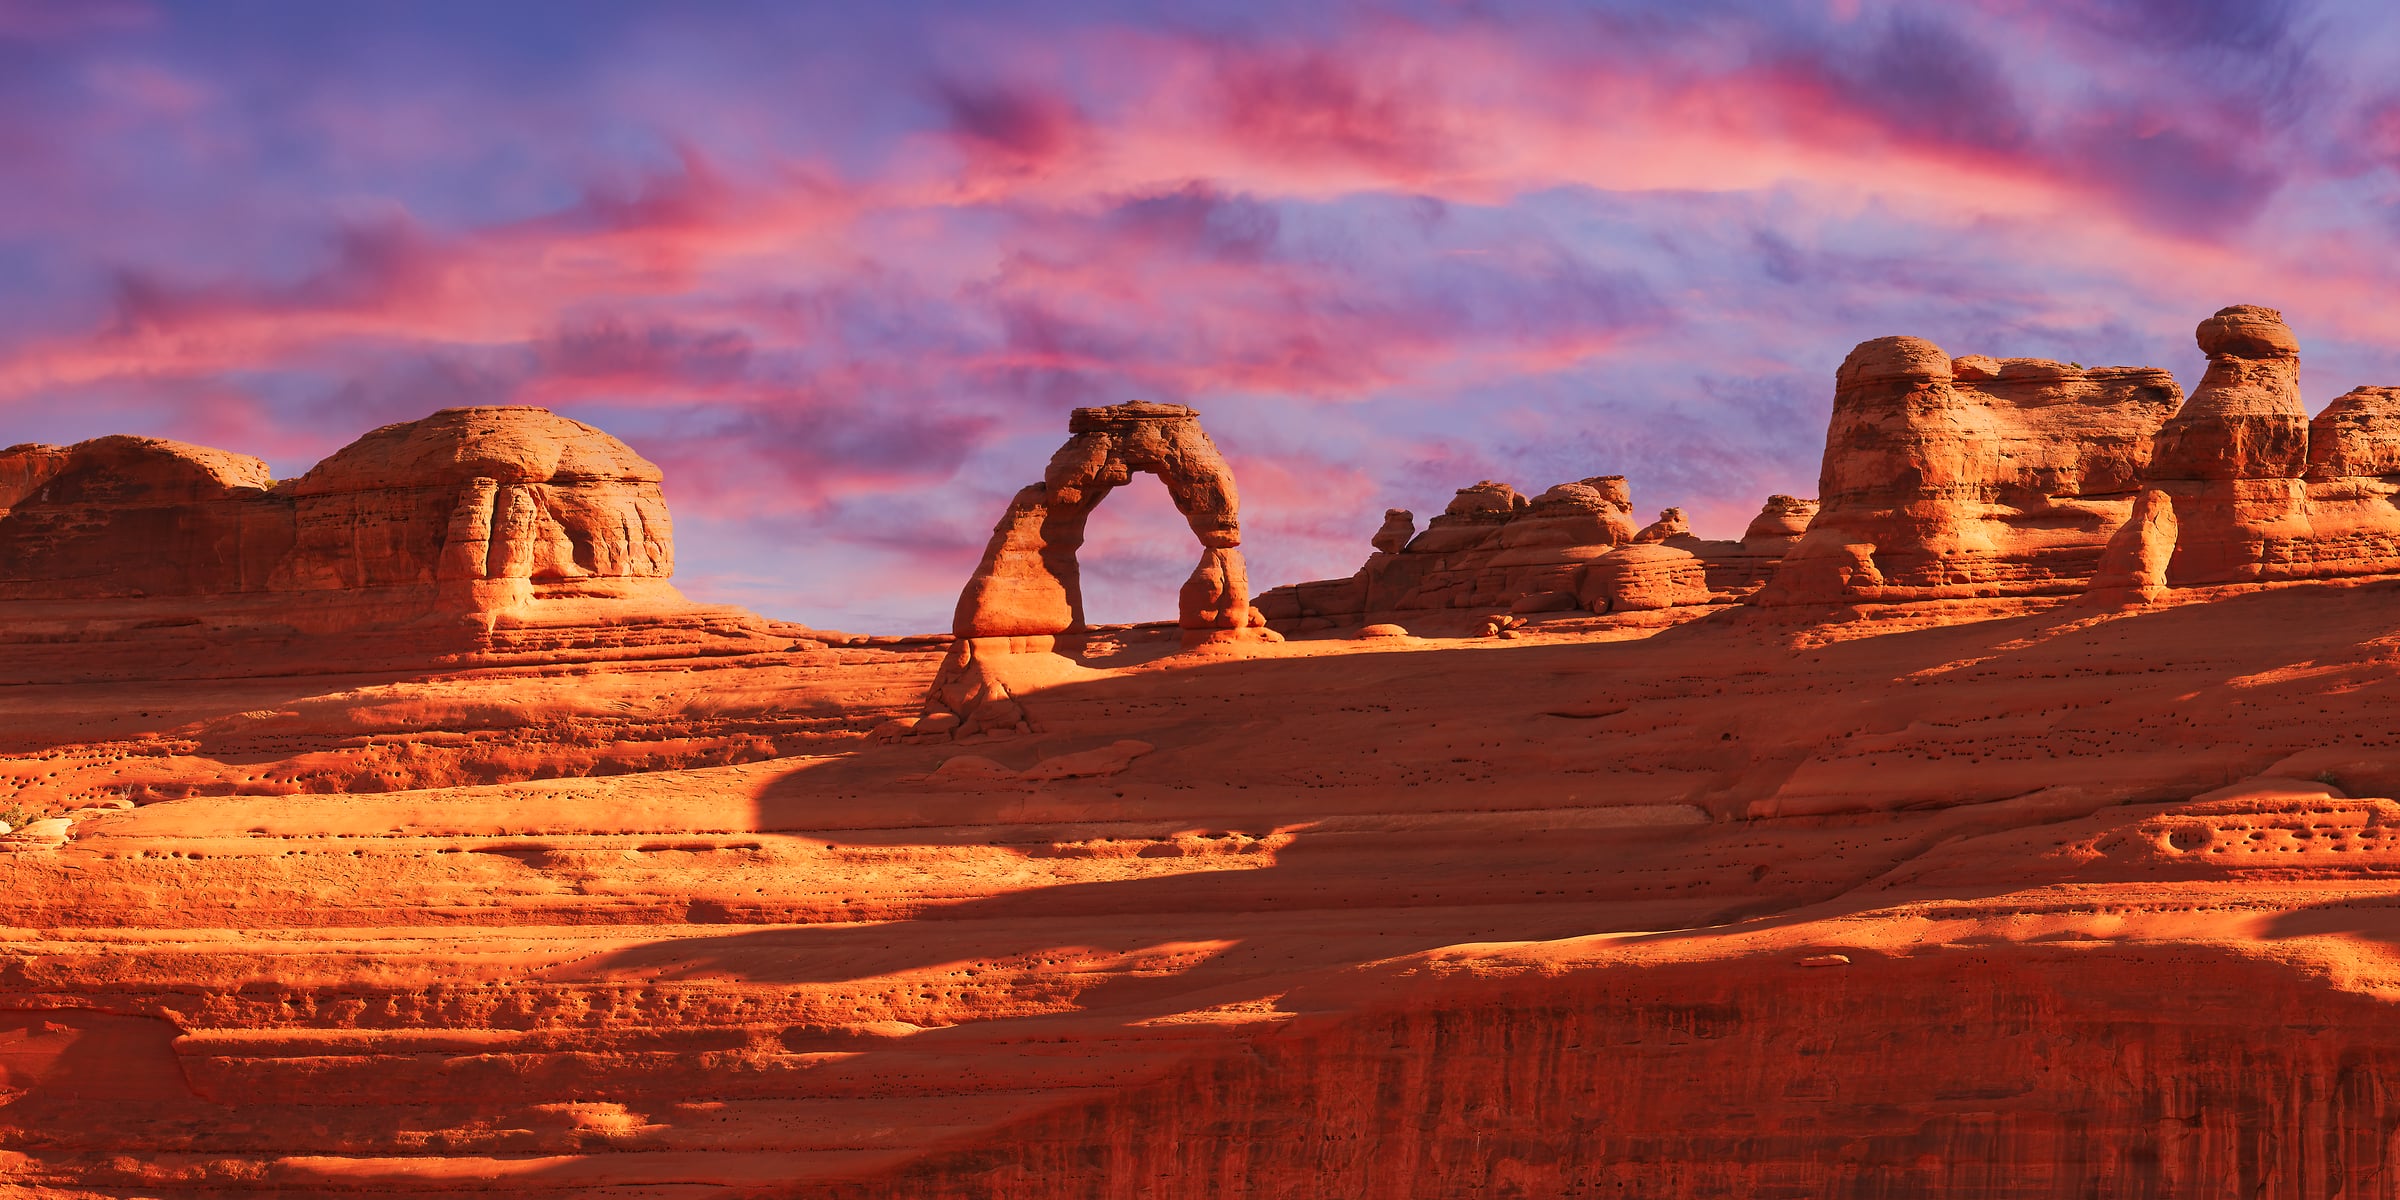 169 megapixels! A very high resolution, large-format VAST photo print of Delicate Arch at sunset in Arches National Park; landscape photograph created by David David in Utah.